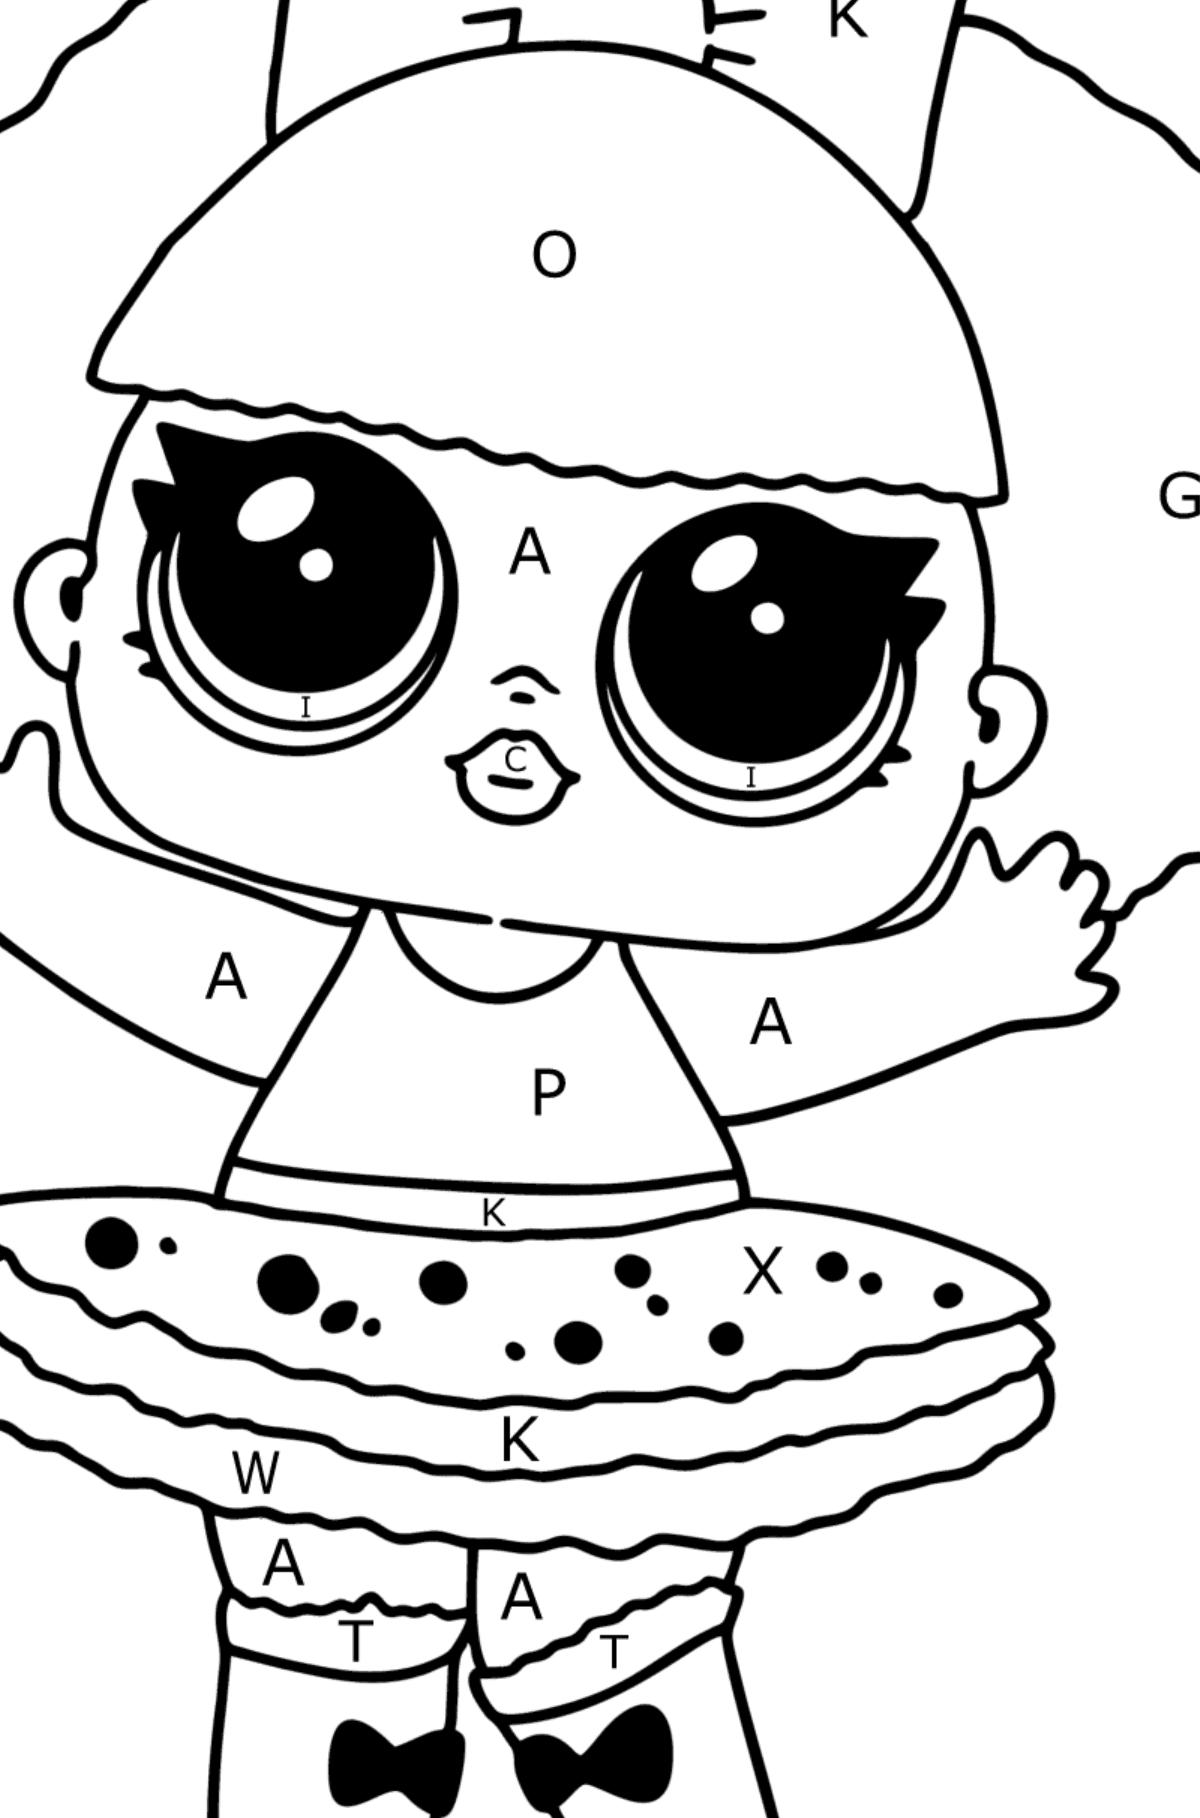 LOL Surprise Diva coloring page - Coloring by Letters for Kids